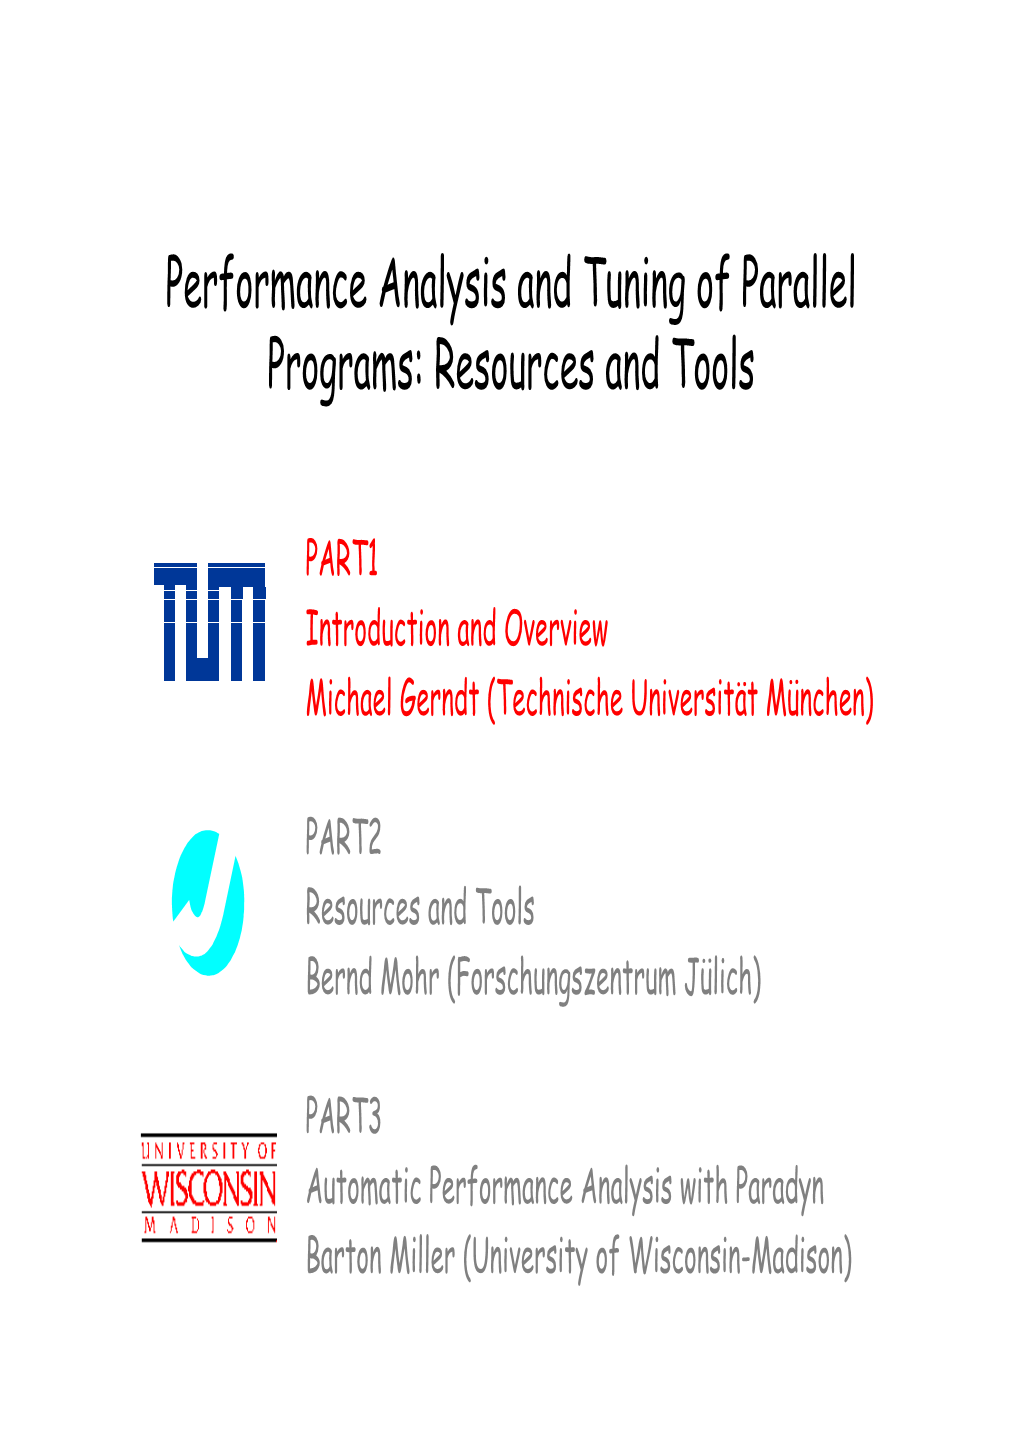 Performance Analysis and Tuning of Parallel Programs: Resources and Tools